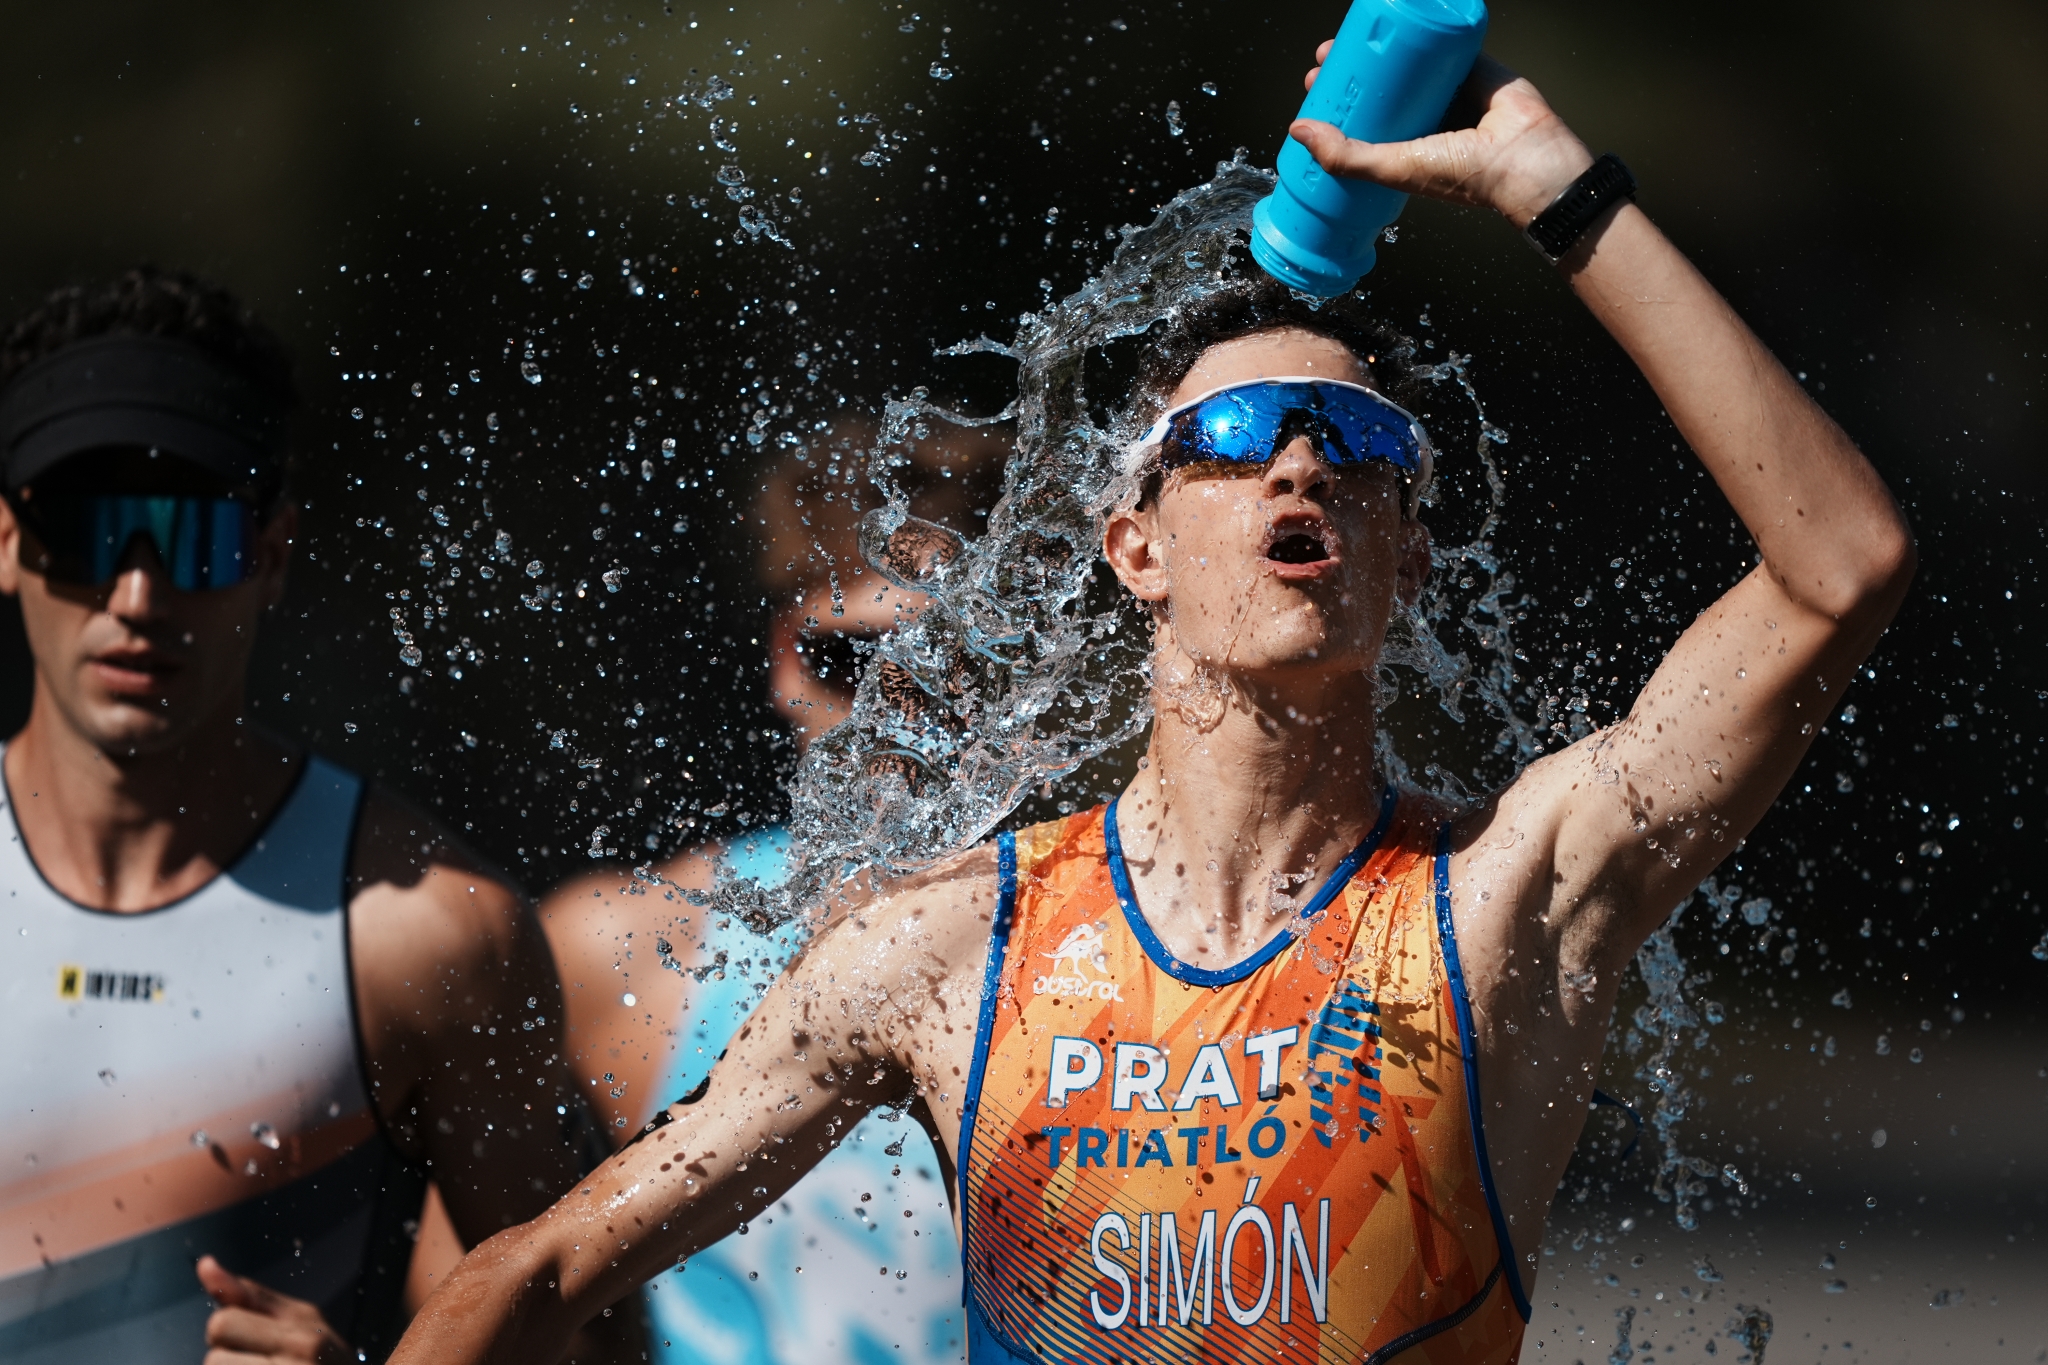 Male athlete pouring water over his head to cool down